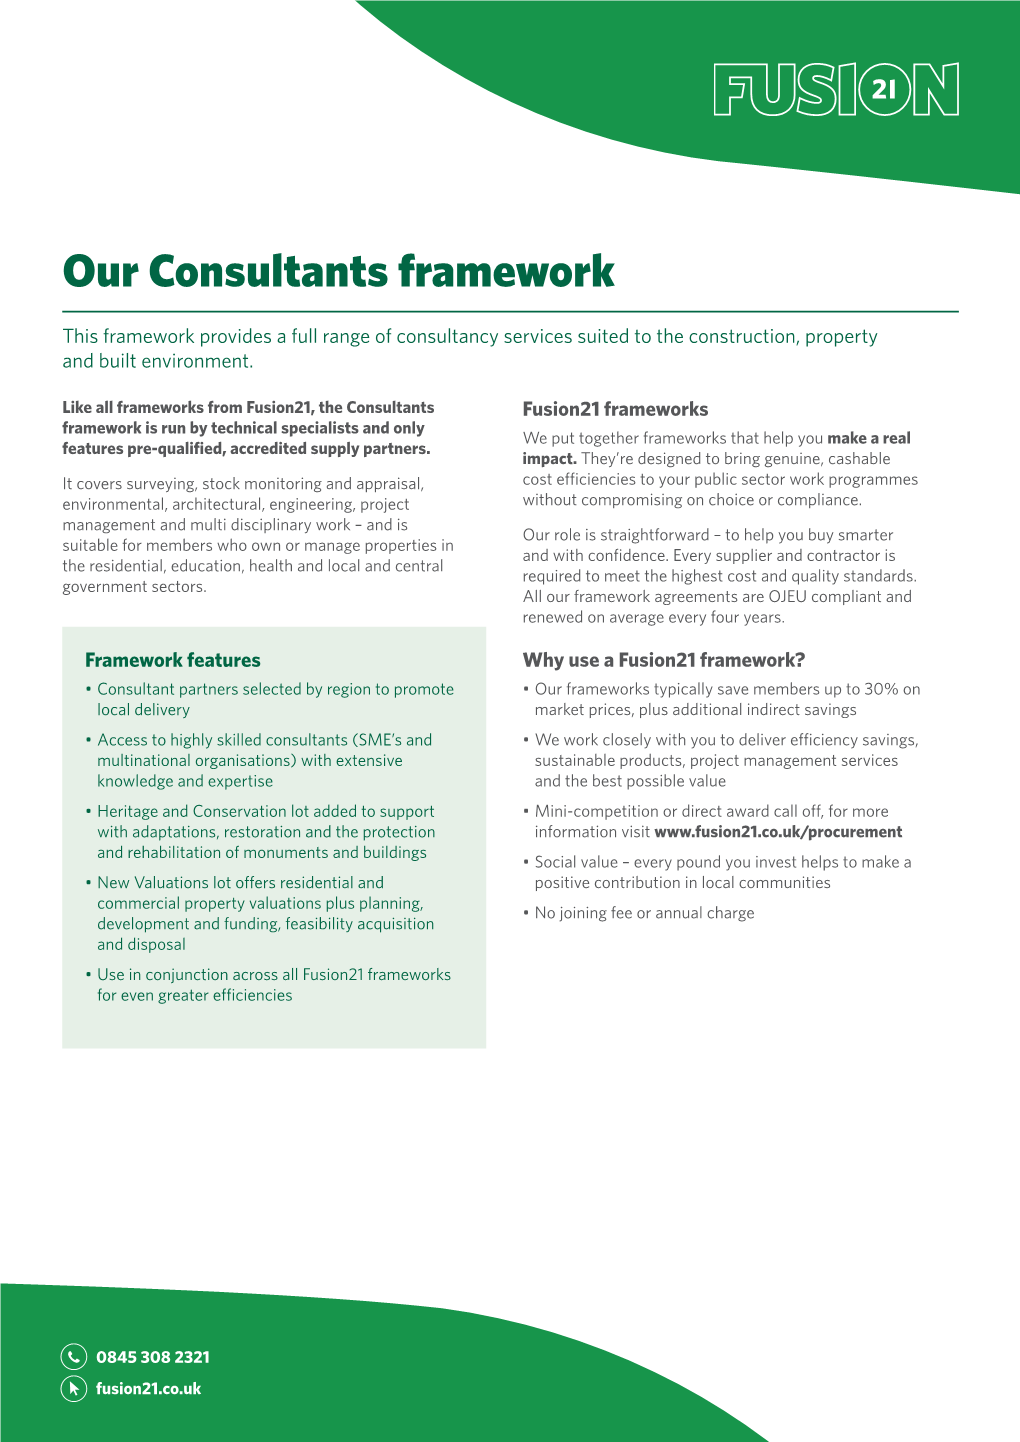 Our Consultants Framework